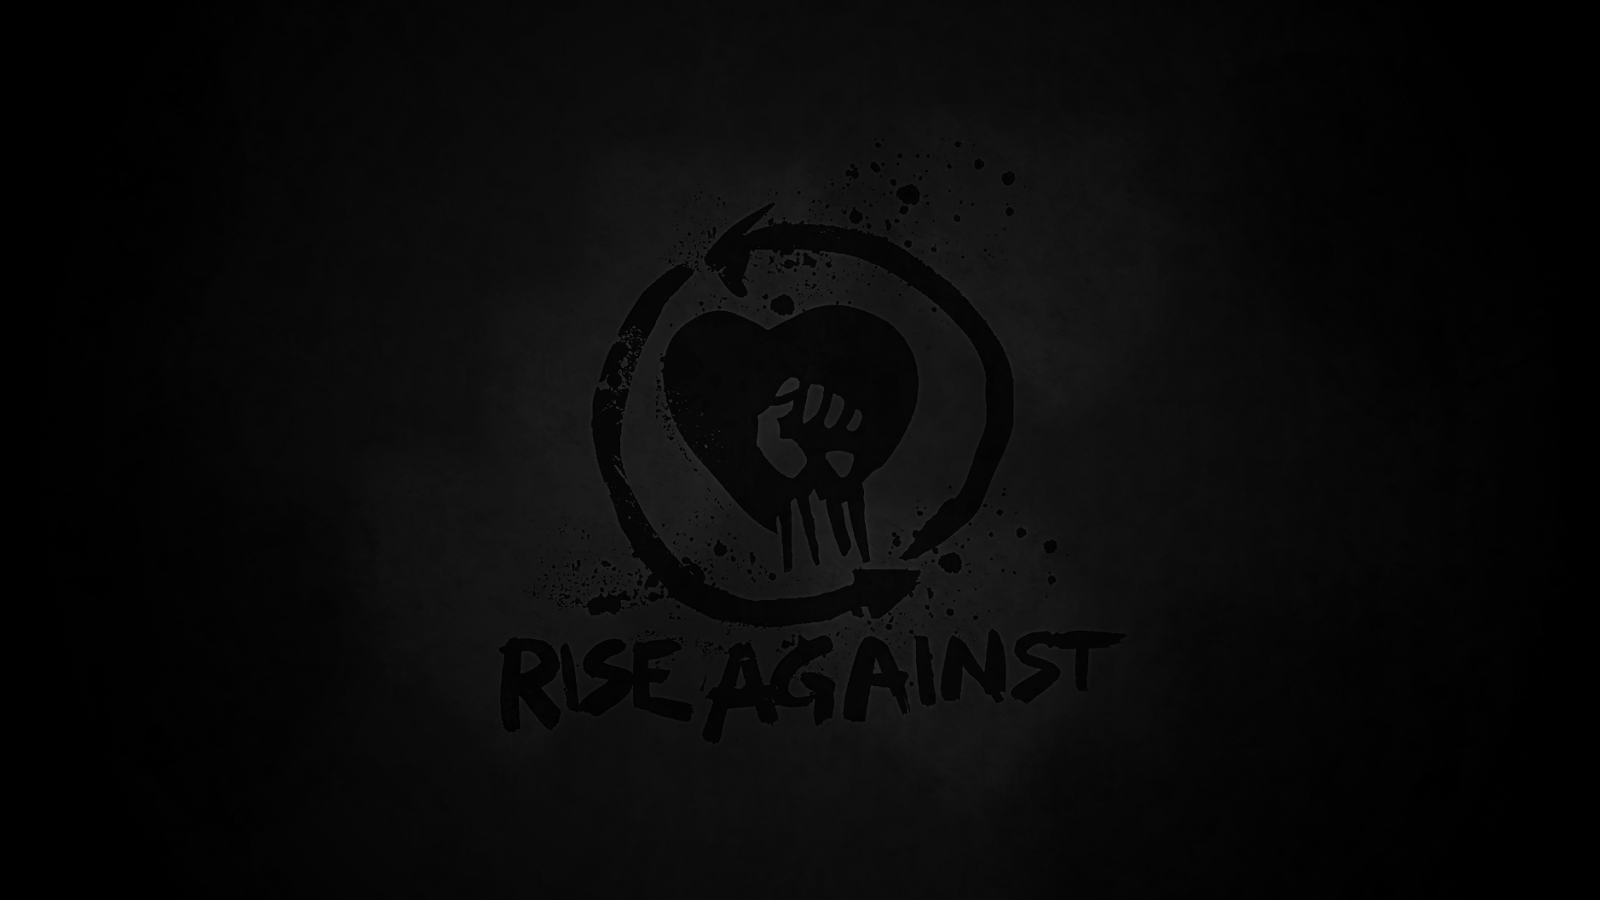 Rise Against Wide Wallpaper By Cajefm